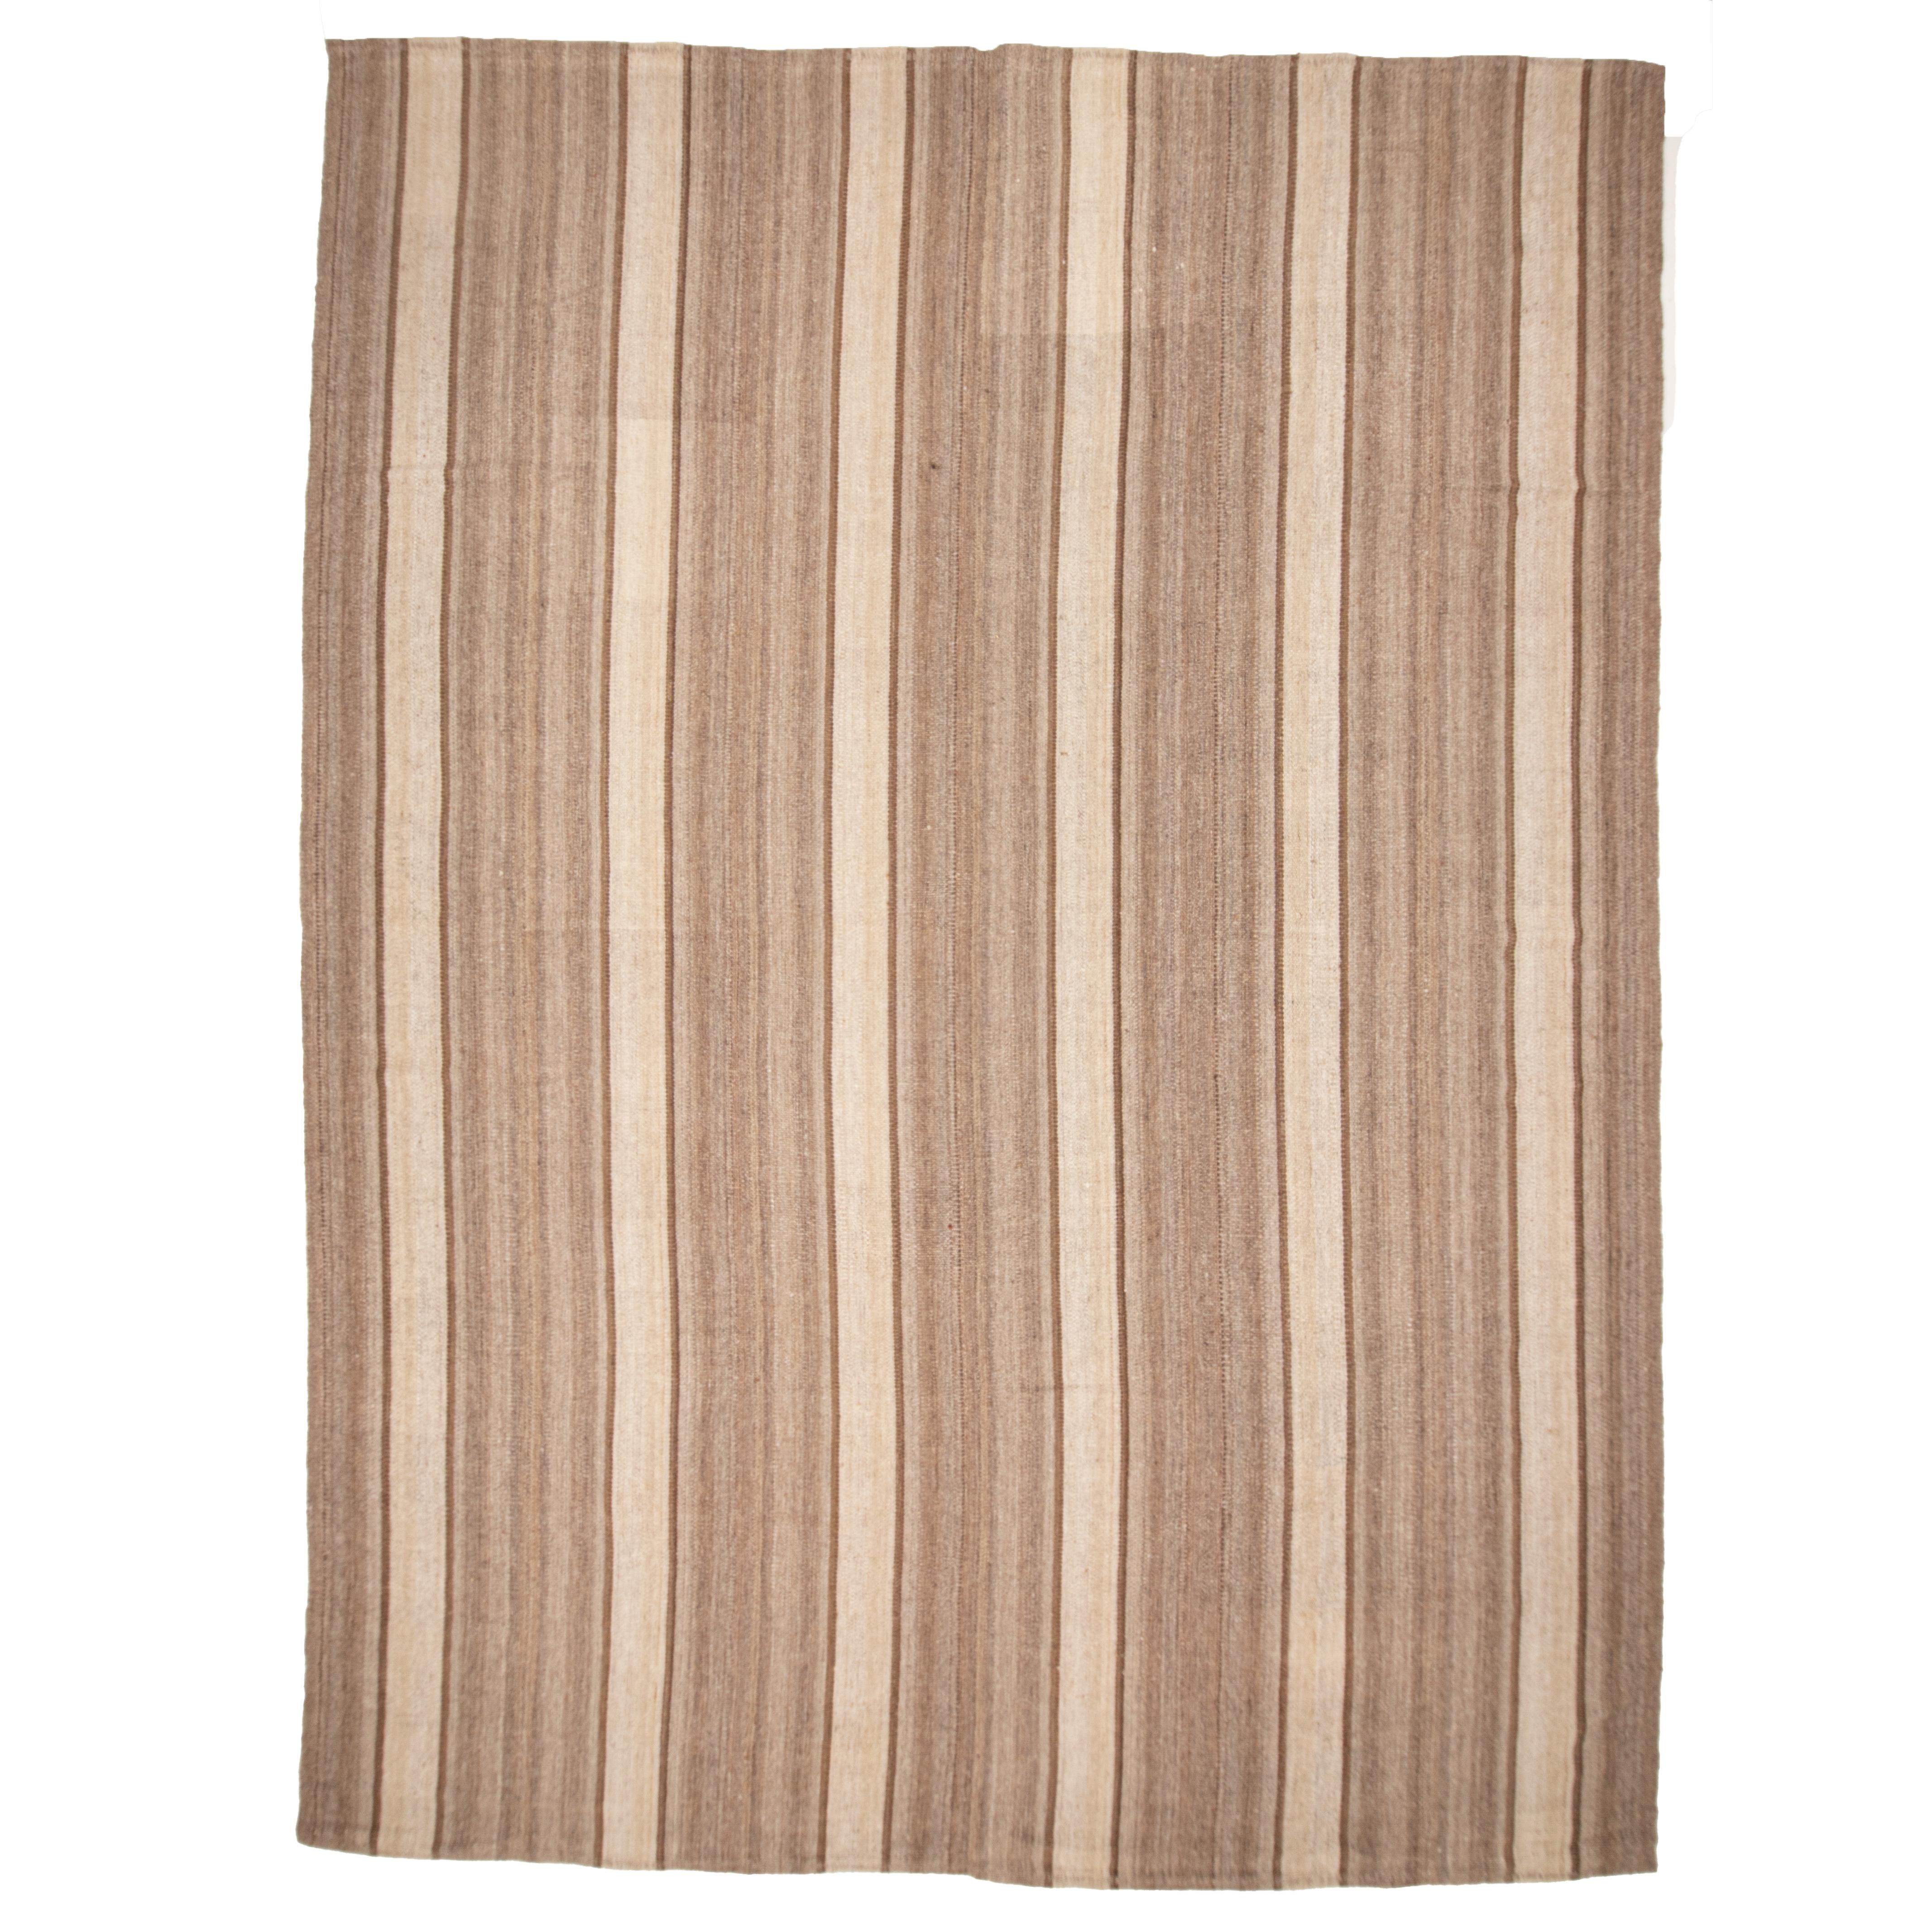 This kilim is woven with undyed wool yarns in narrow stripes and then hand stitched . It has a soft handle.

